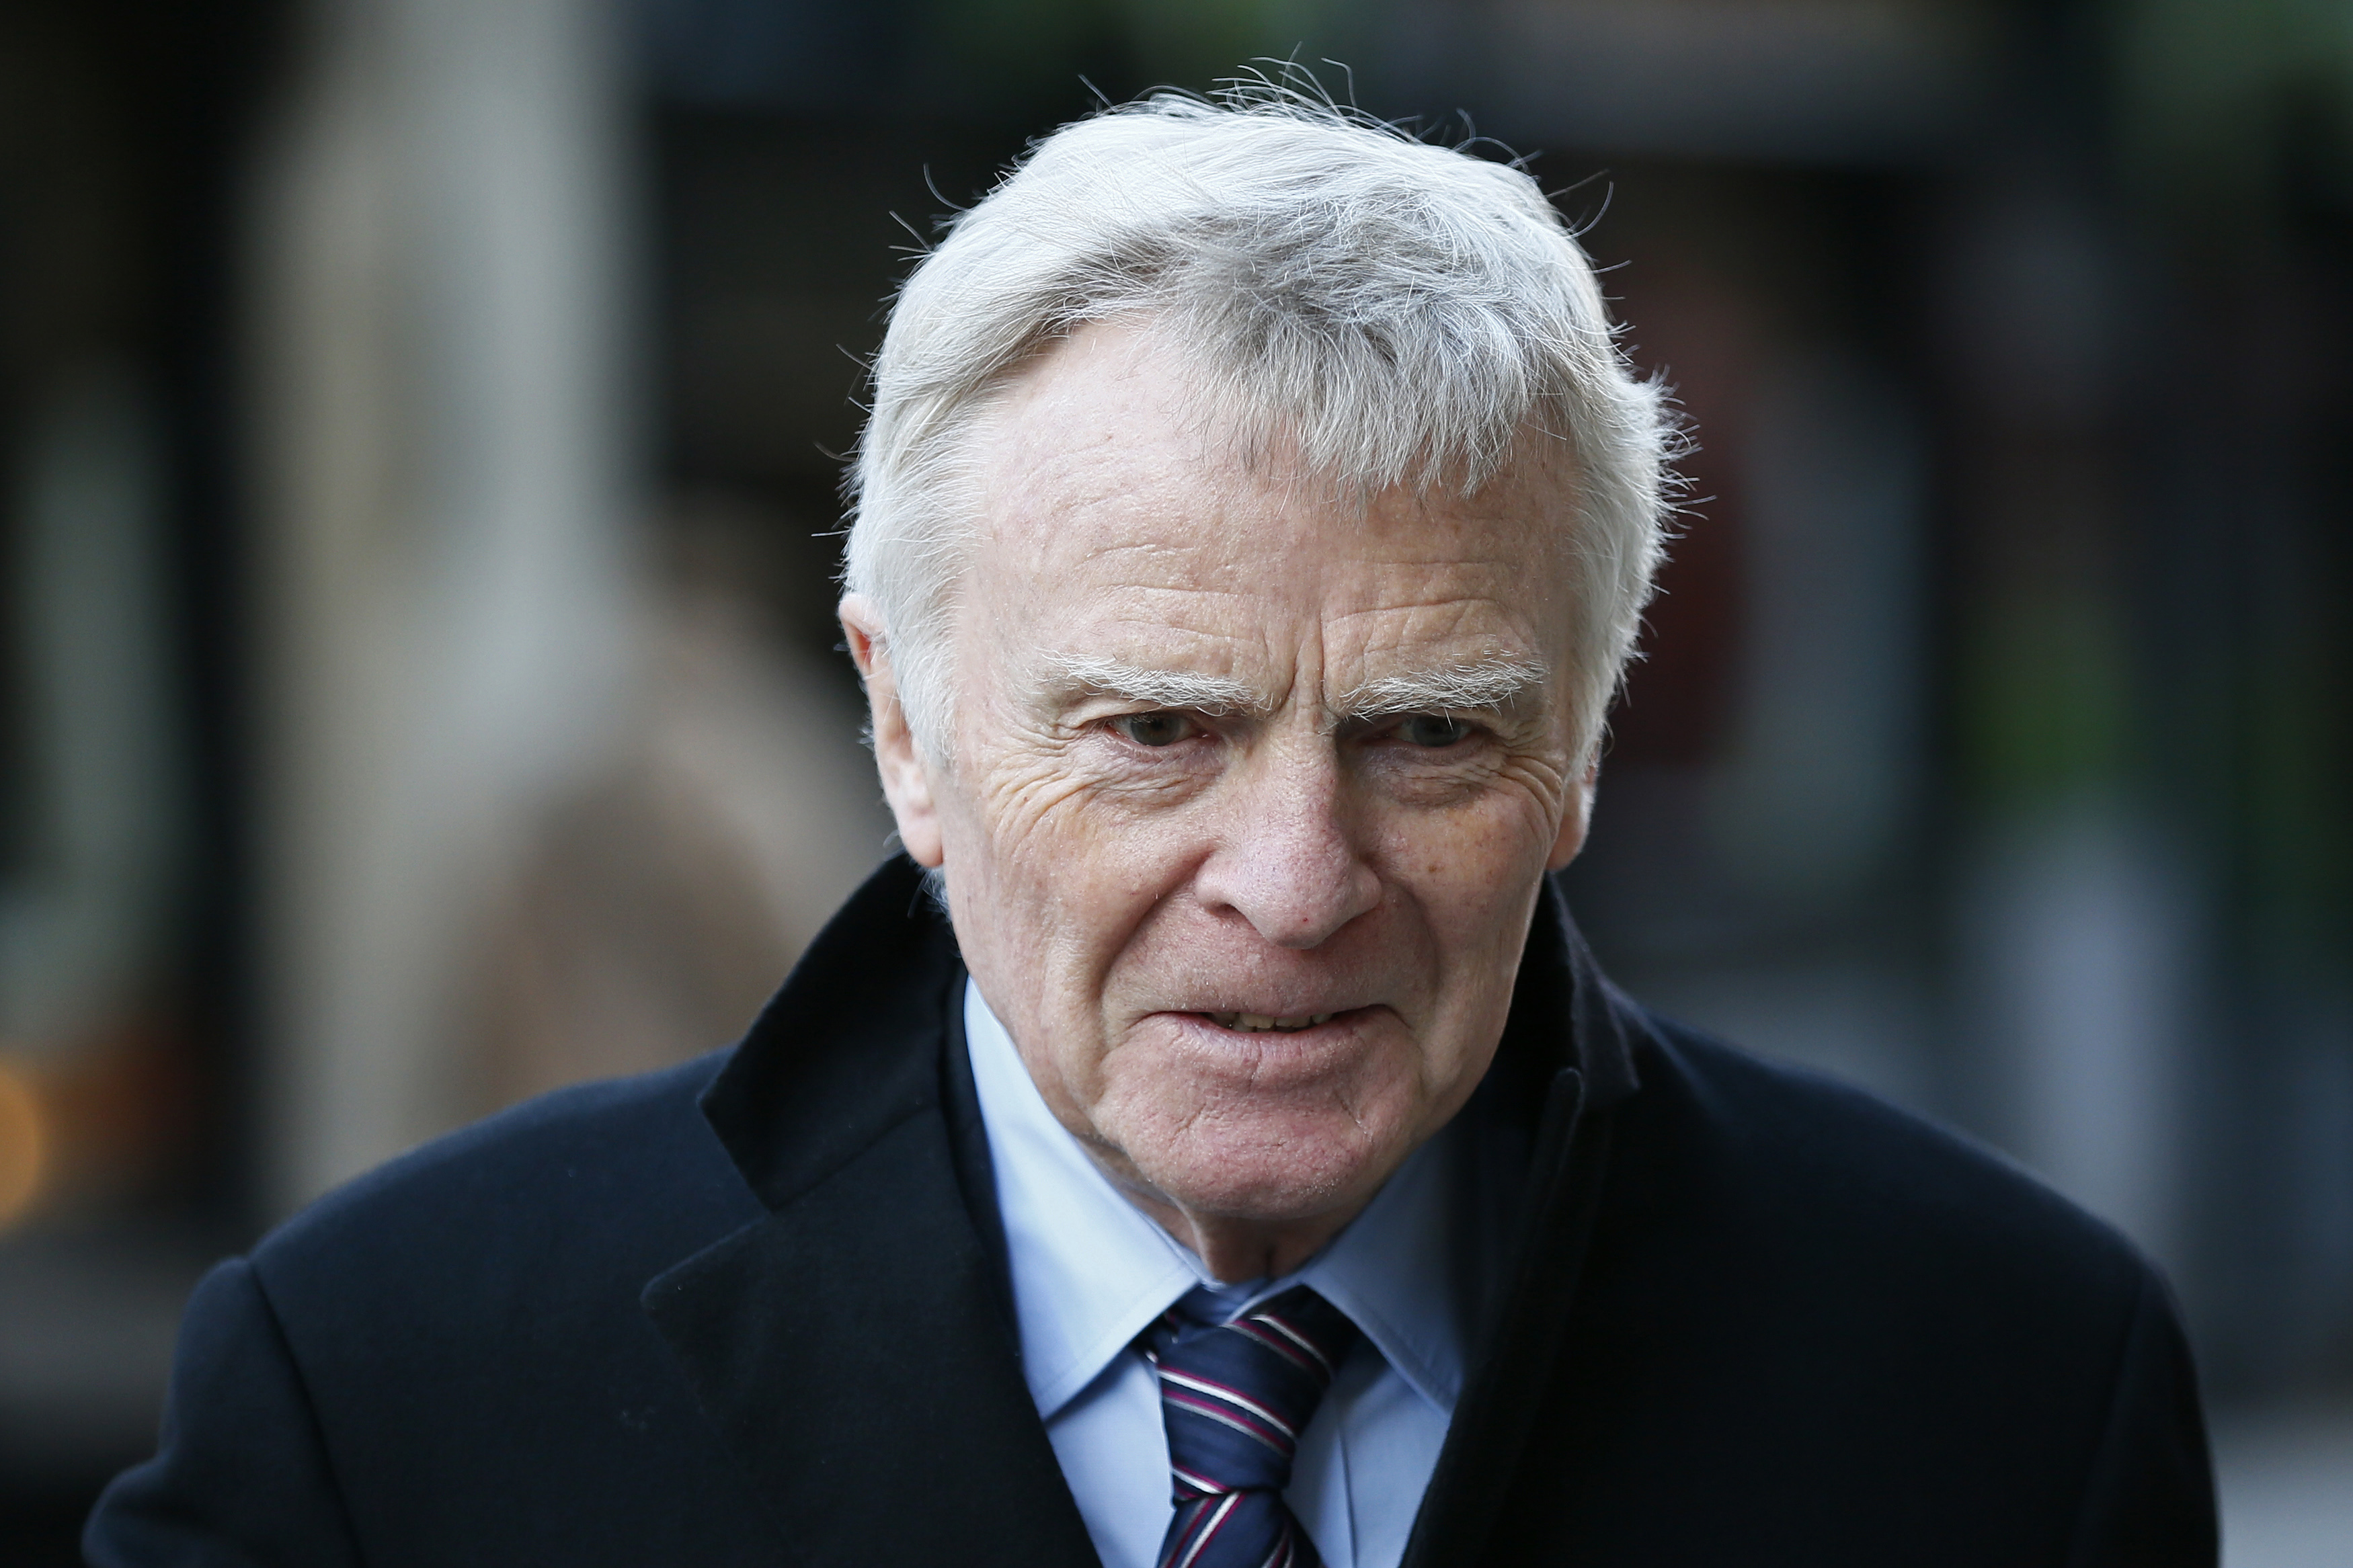 Former F1 Boss Max Mosley Shot himself After Terminal Cancer diagnosis, inquest hears